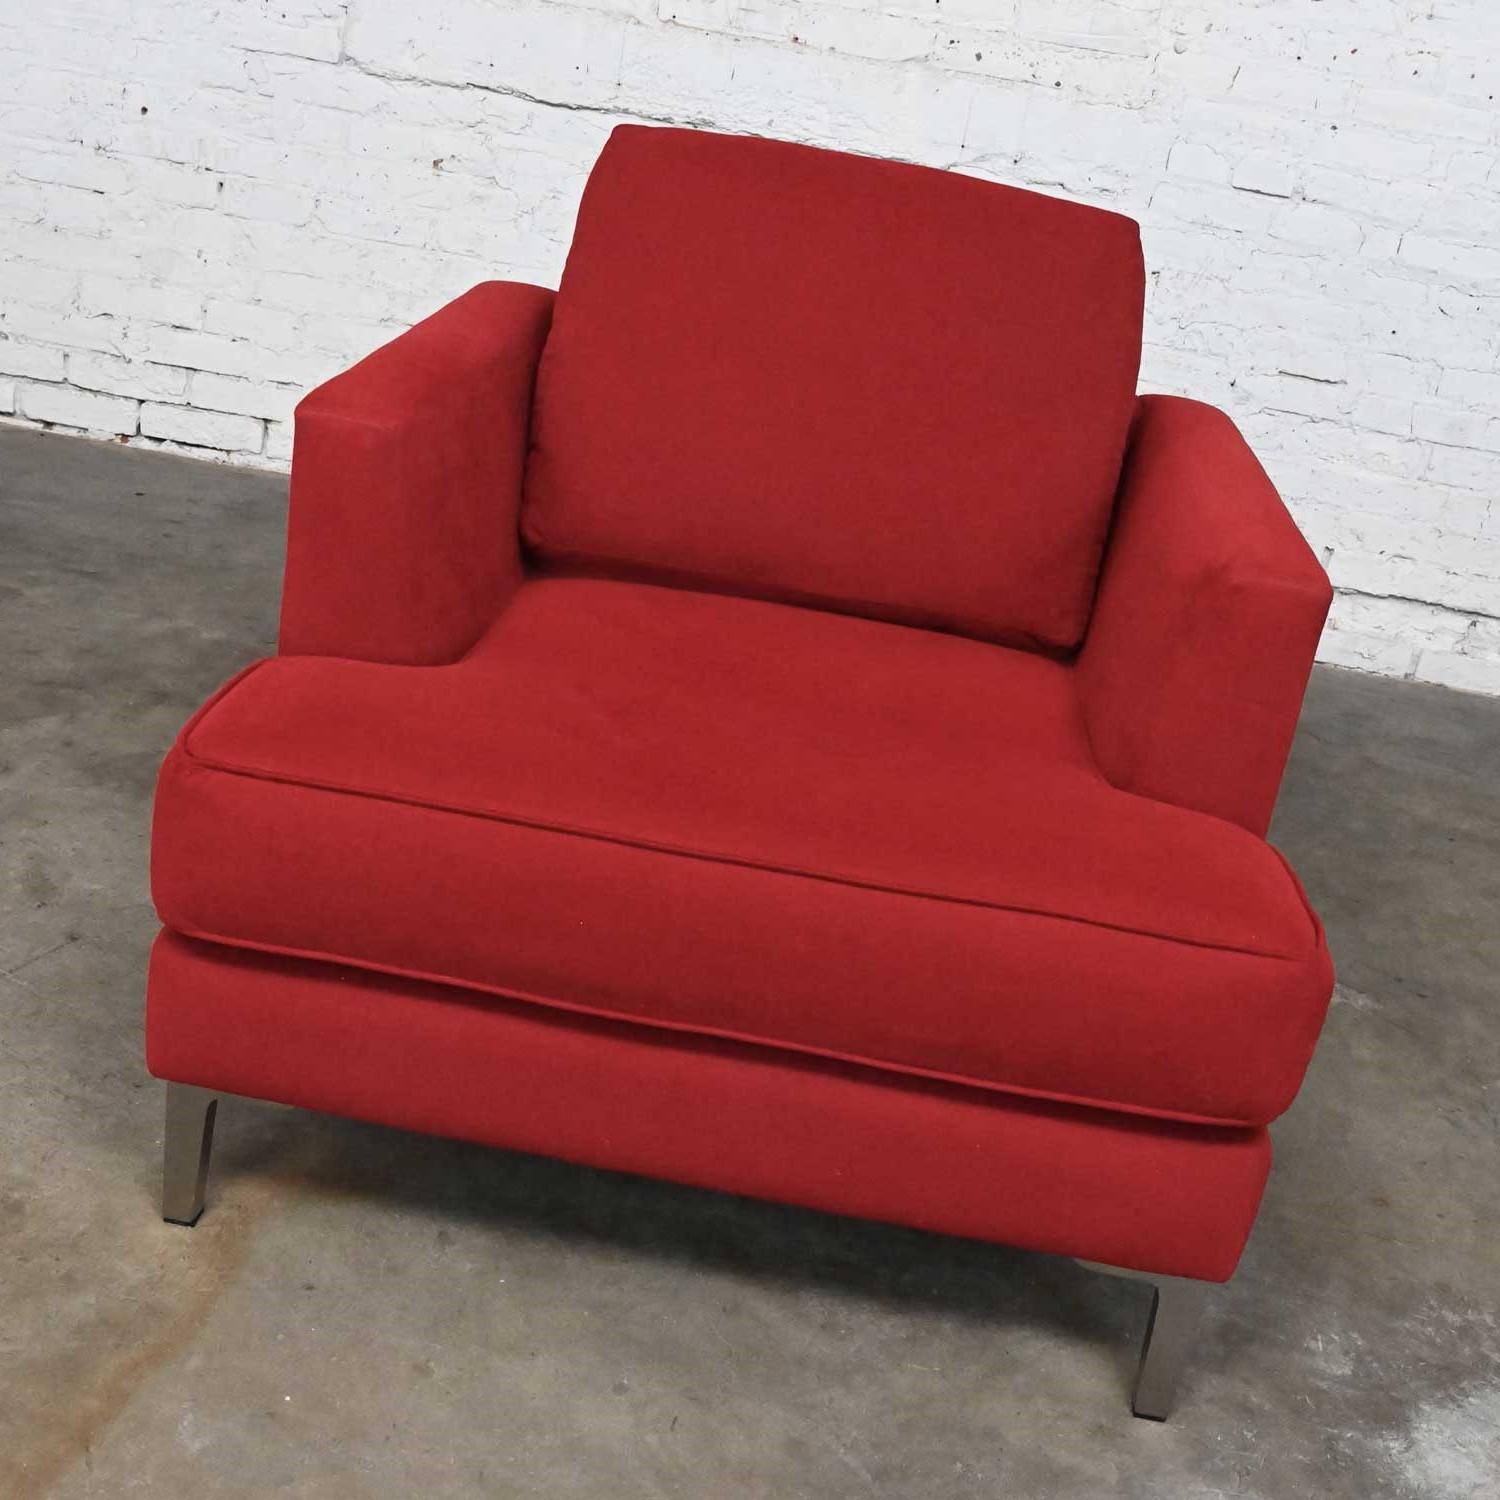 Modern Carter Club Chair Attr Zen Collection Bright Red with Polished Steel Legs For Sale 1